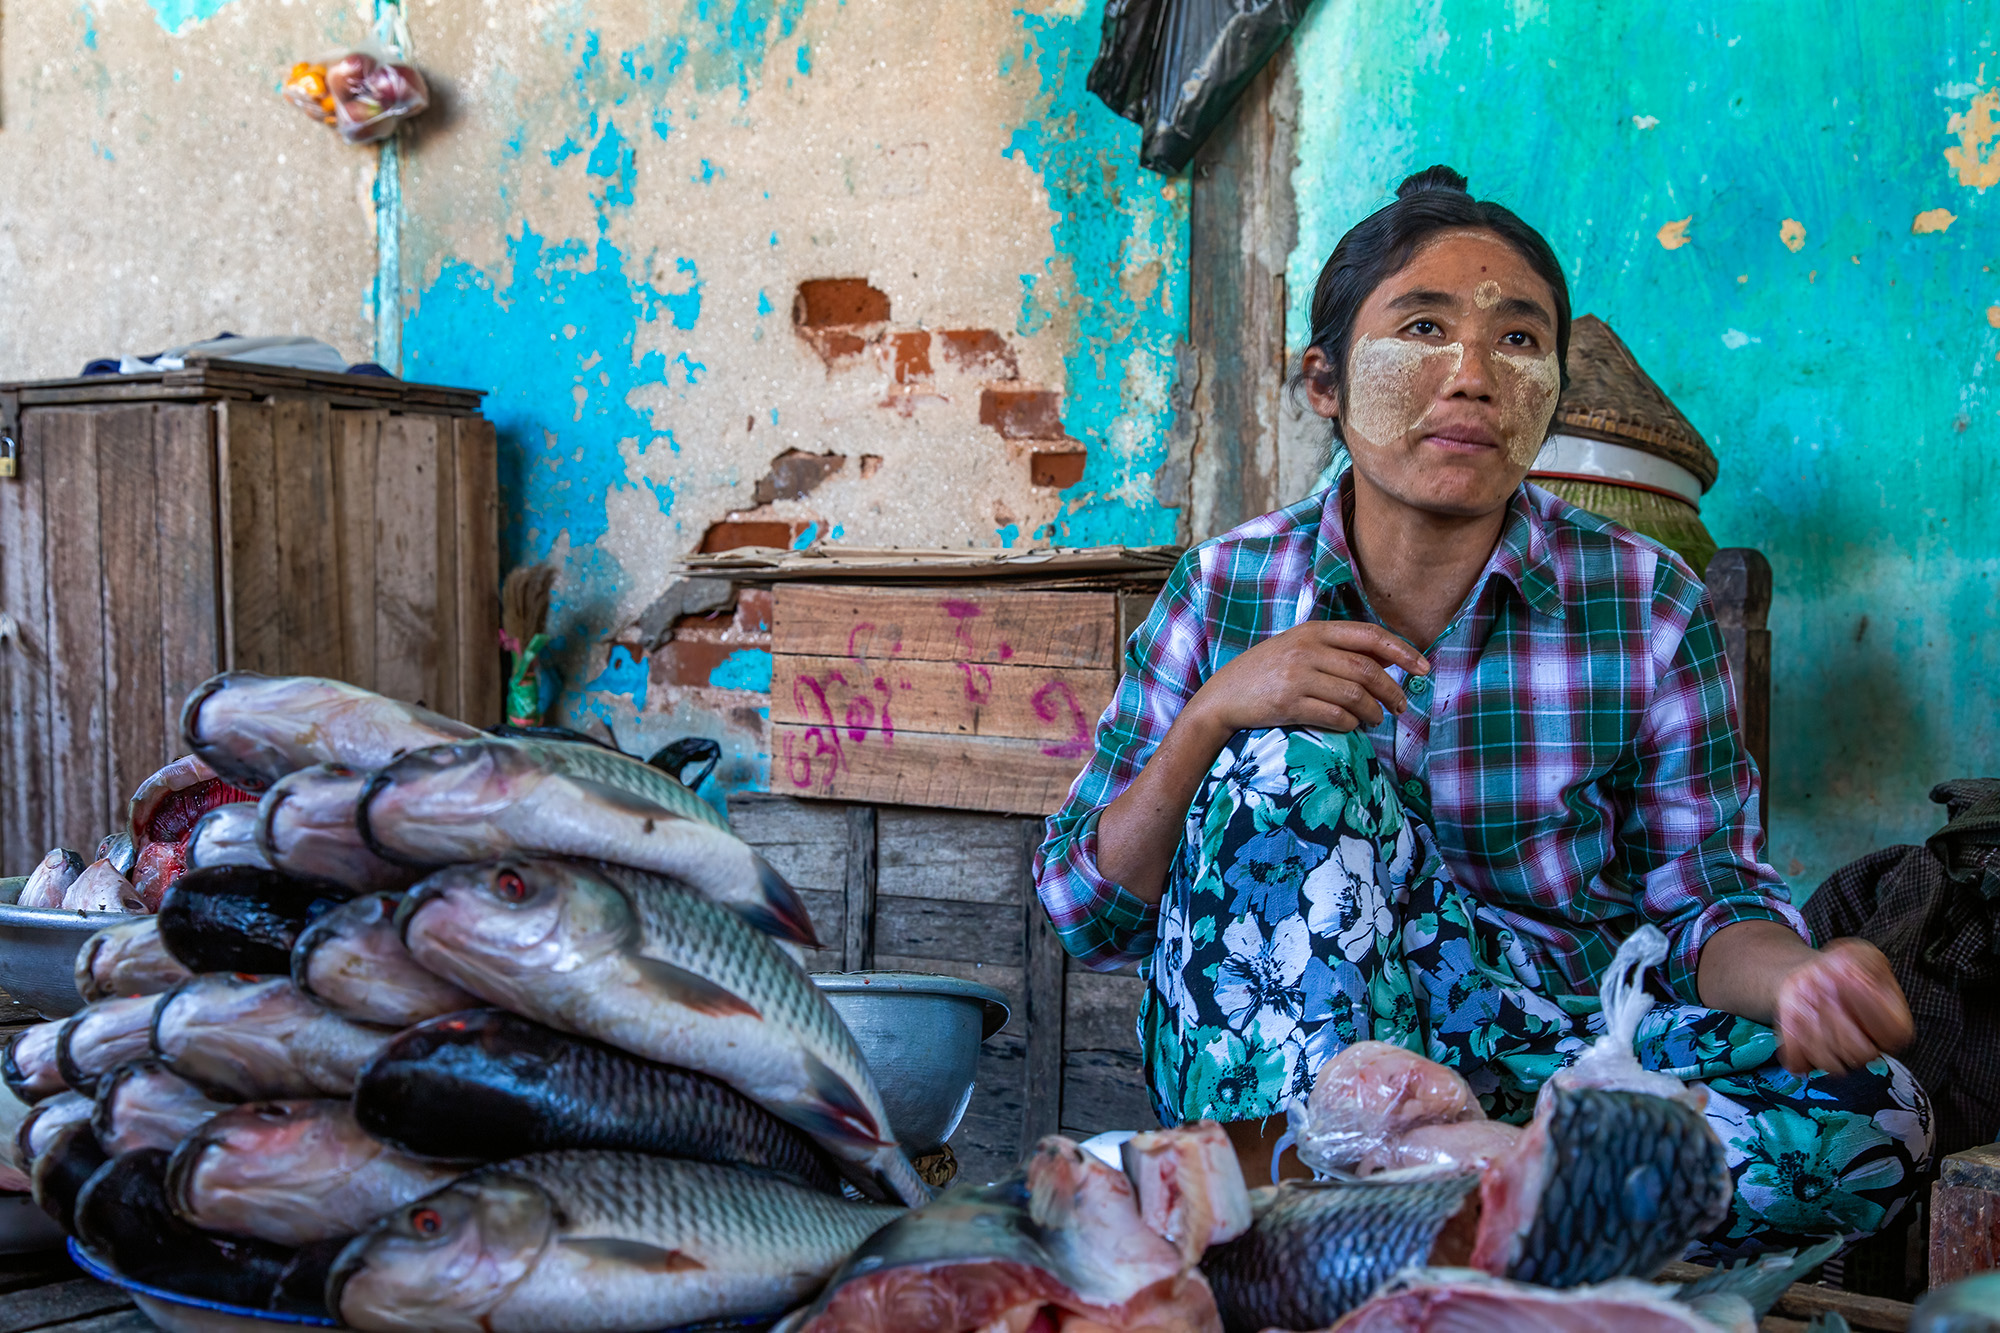 In the bustling market of Tettaung, Shan State, Myanmar, "Fishmonger's Pride" portrays a determined woman at work. With the distinctive...